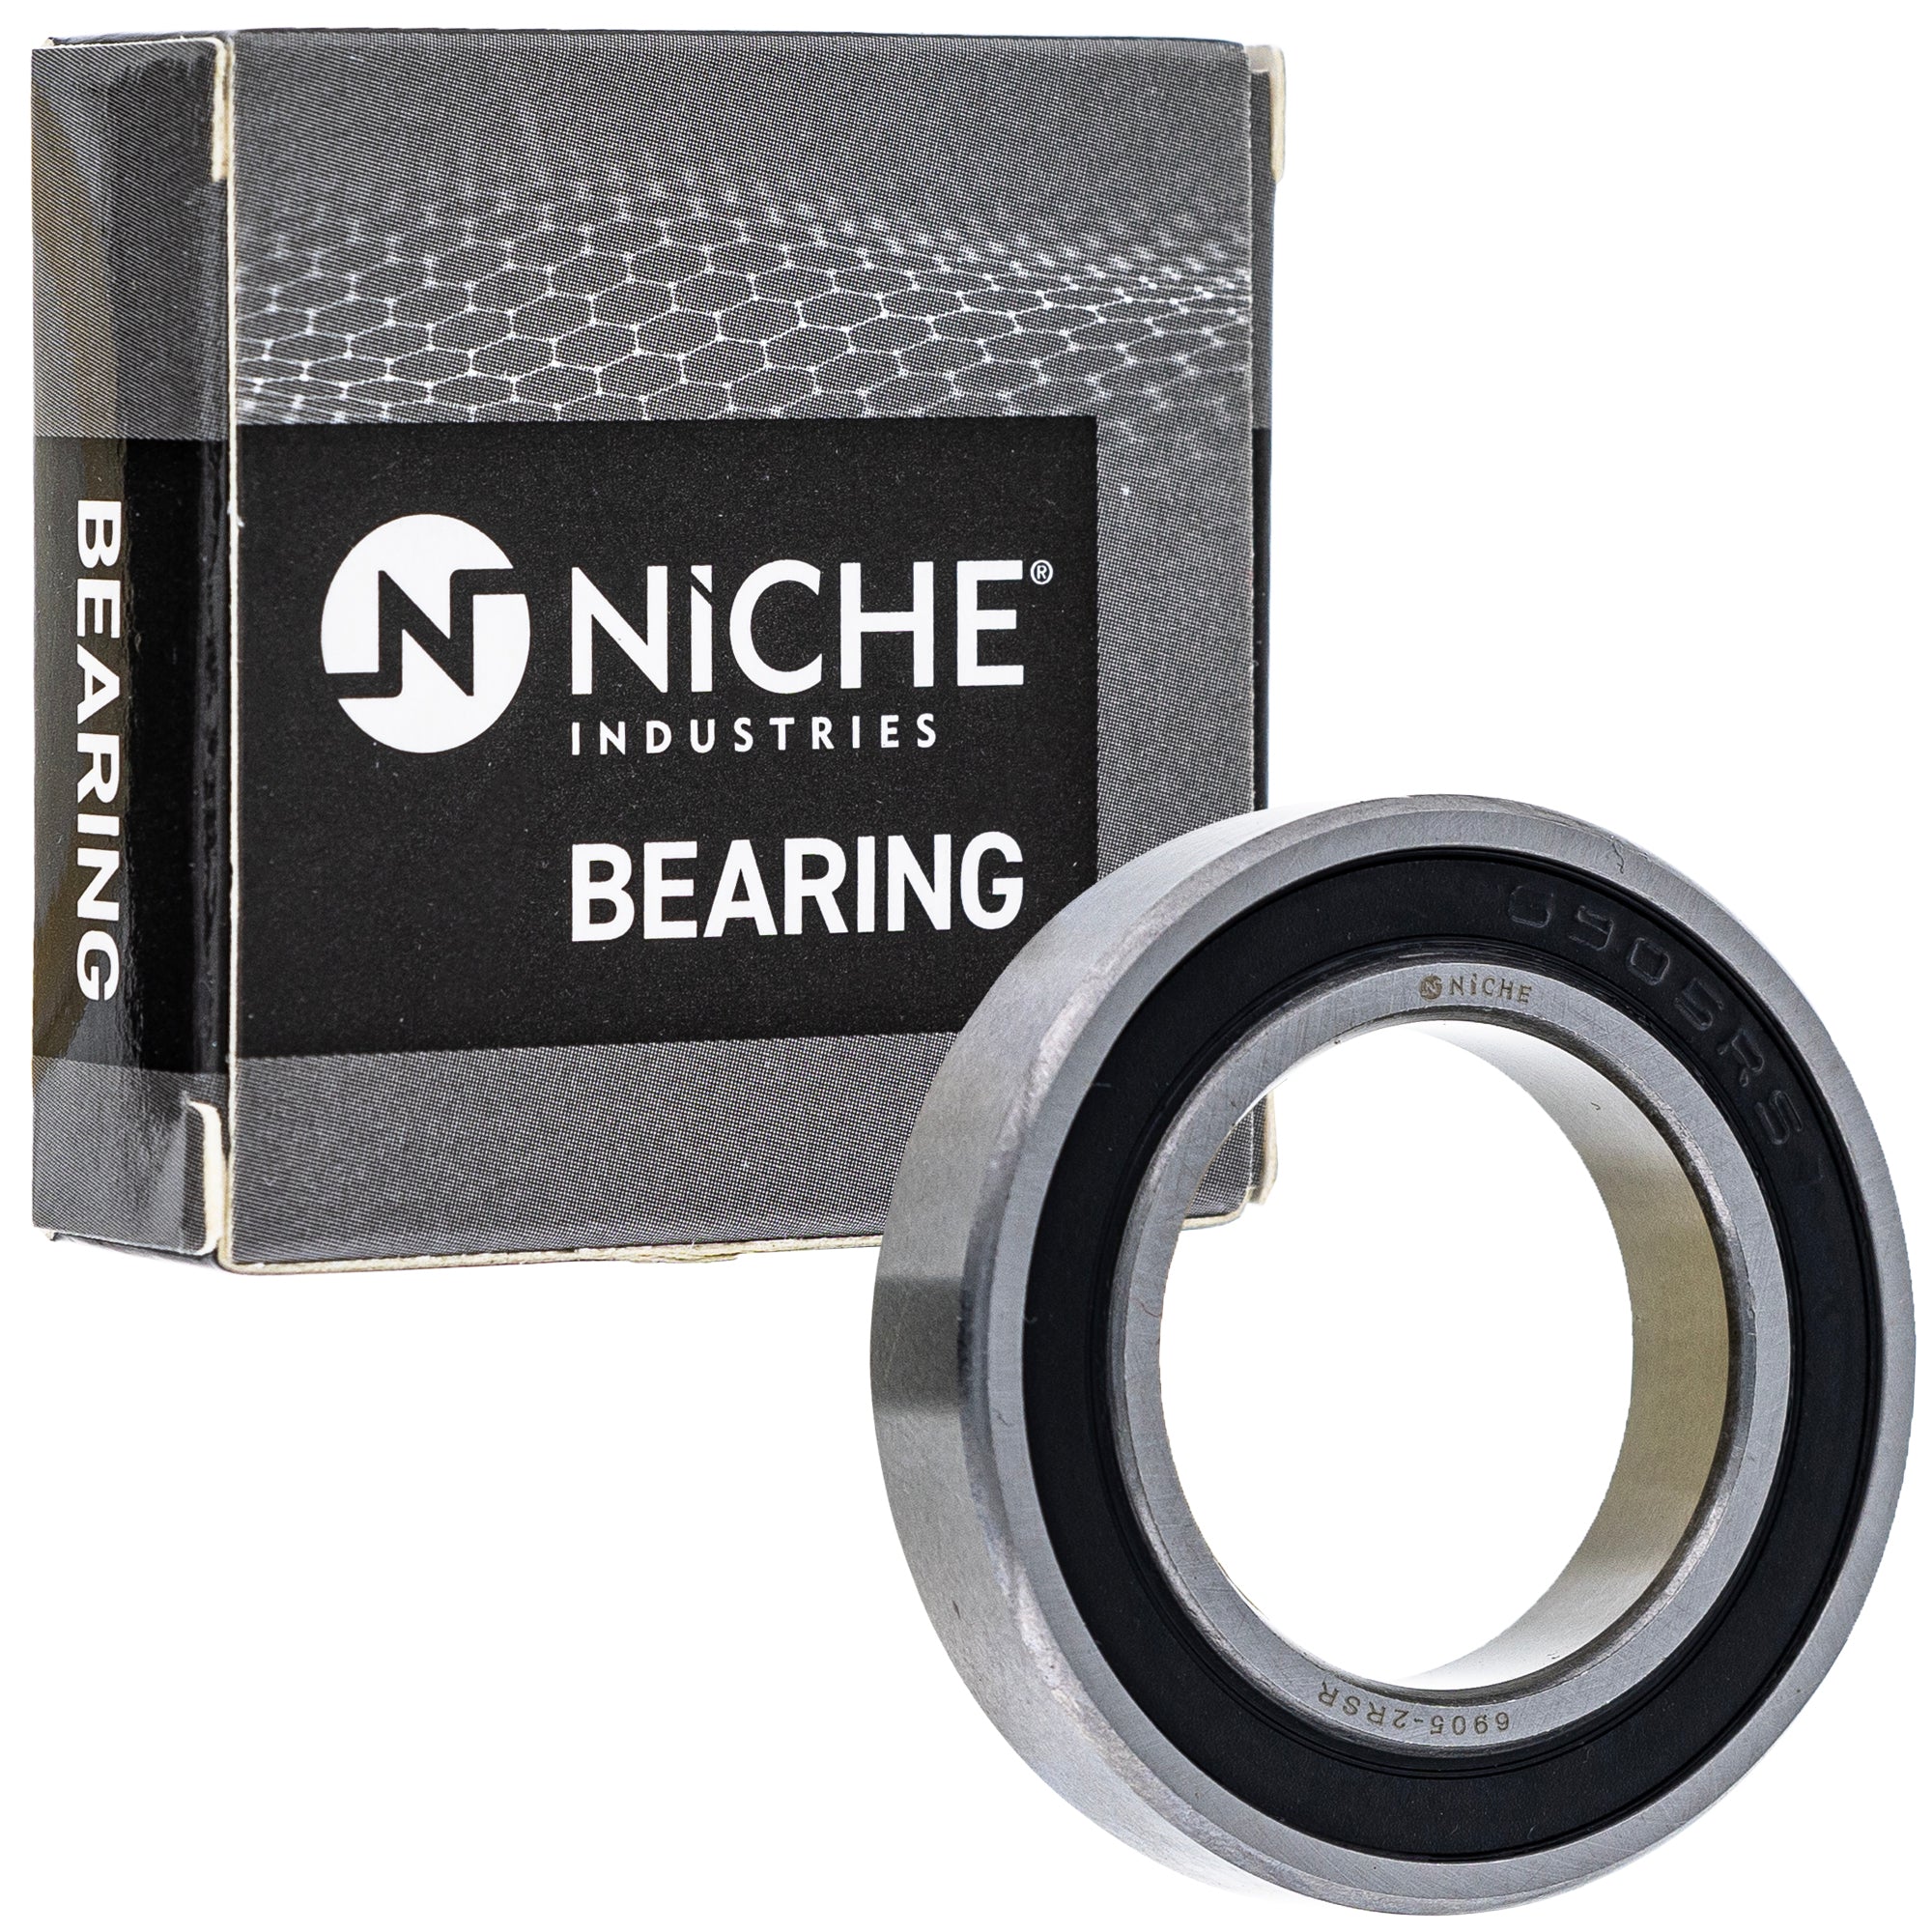 NICHE 519-CBB2338R Bearing & Seal Kit 10-Pack for zOTHER VTX1800T3